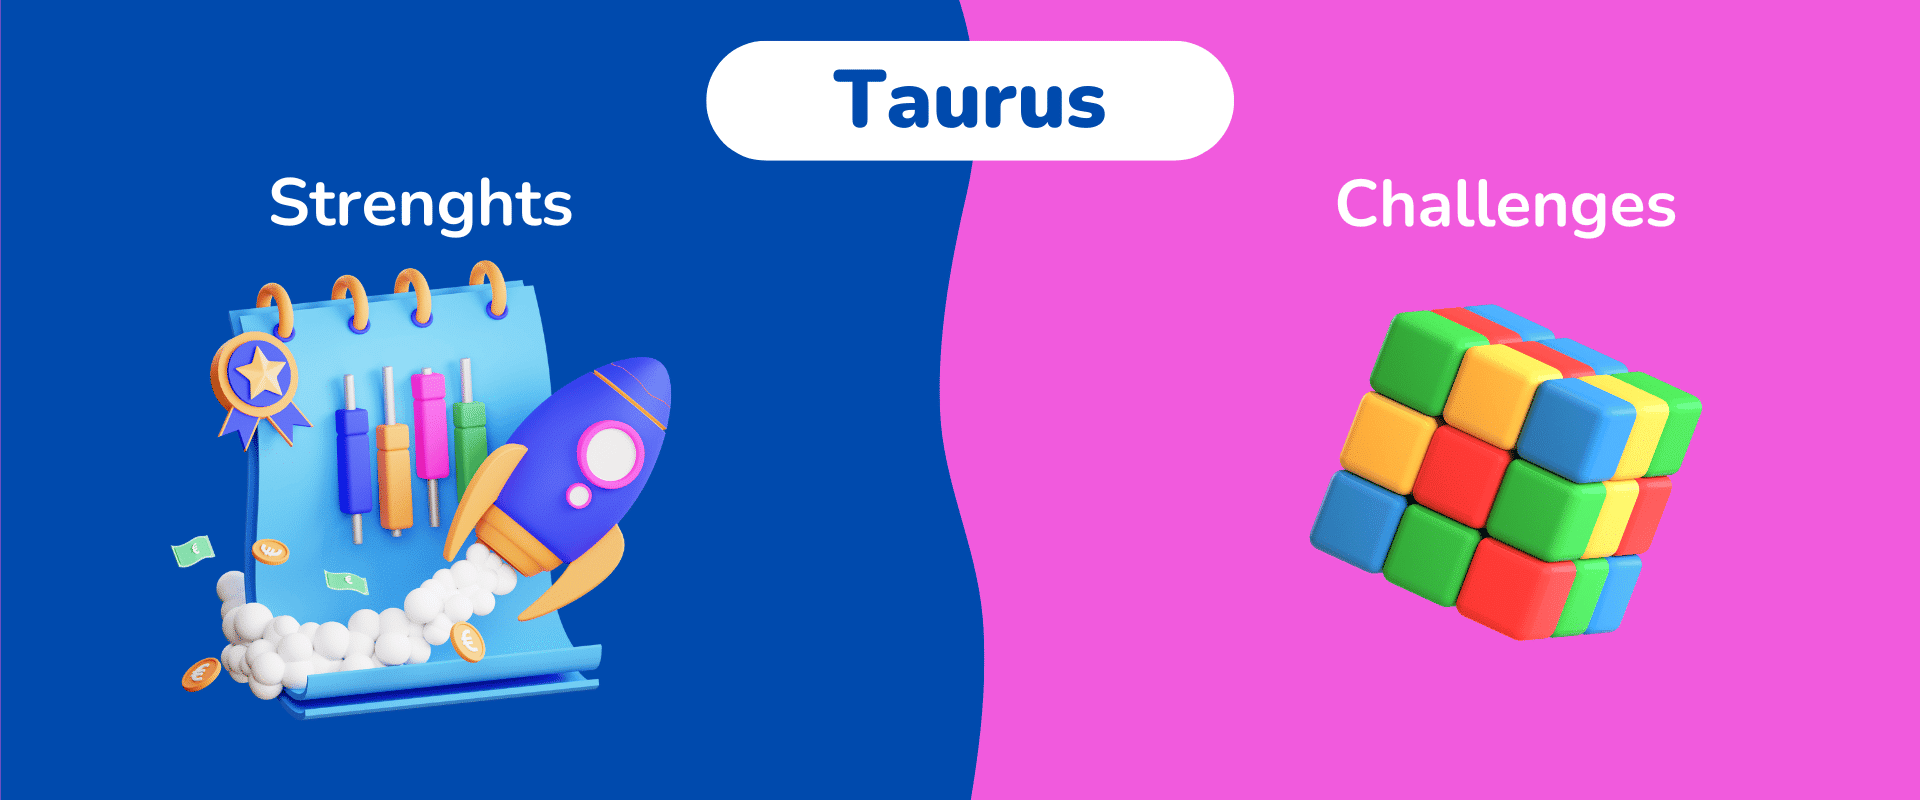 taurus strengths and challenges